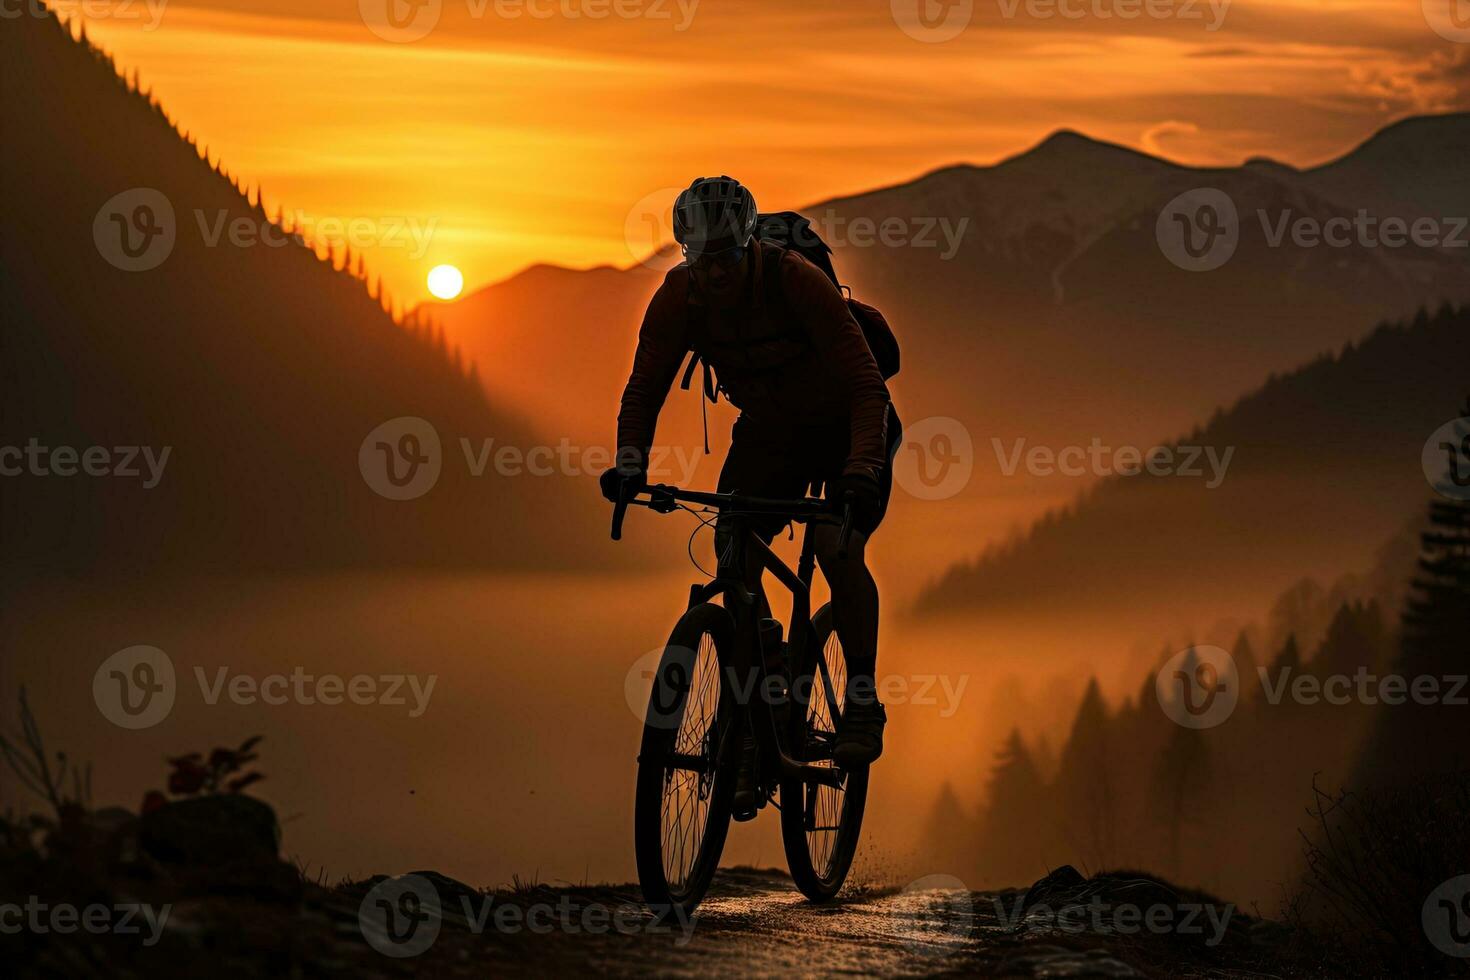 Silhouette of a traveler on a mountain bike in the orange light of the rising sun against the backdrop of a mountain landscape photo